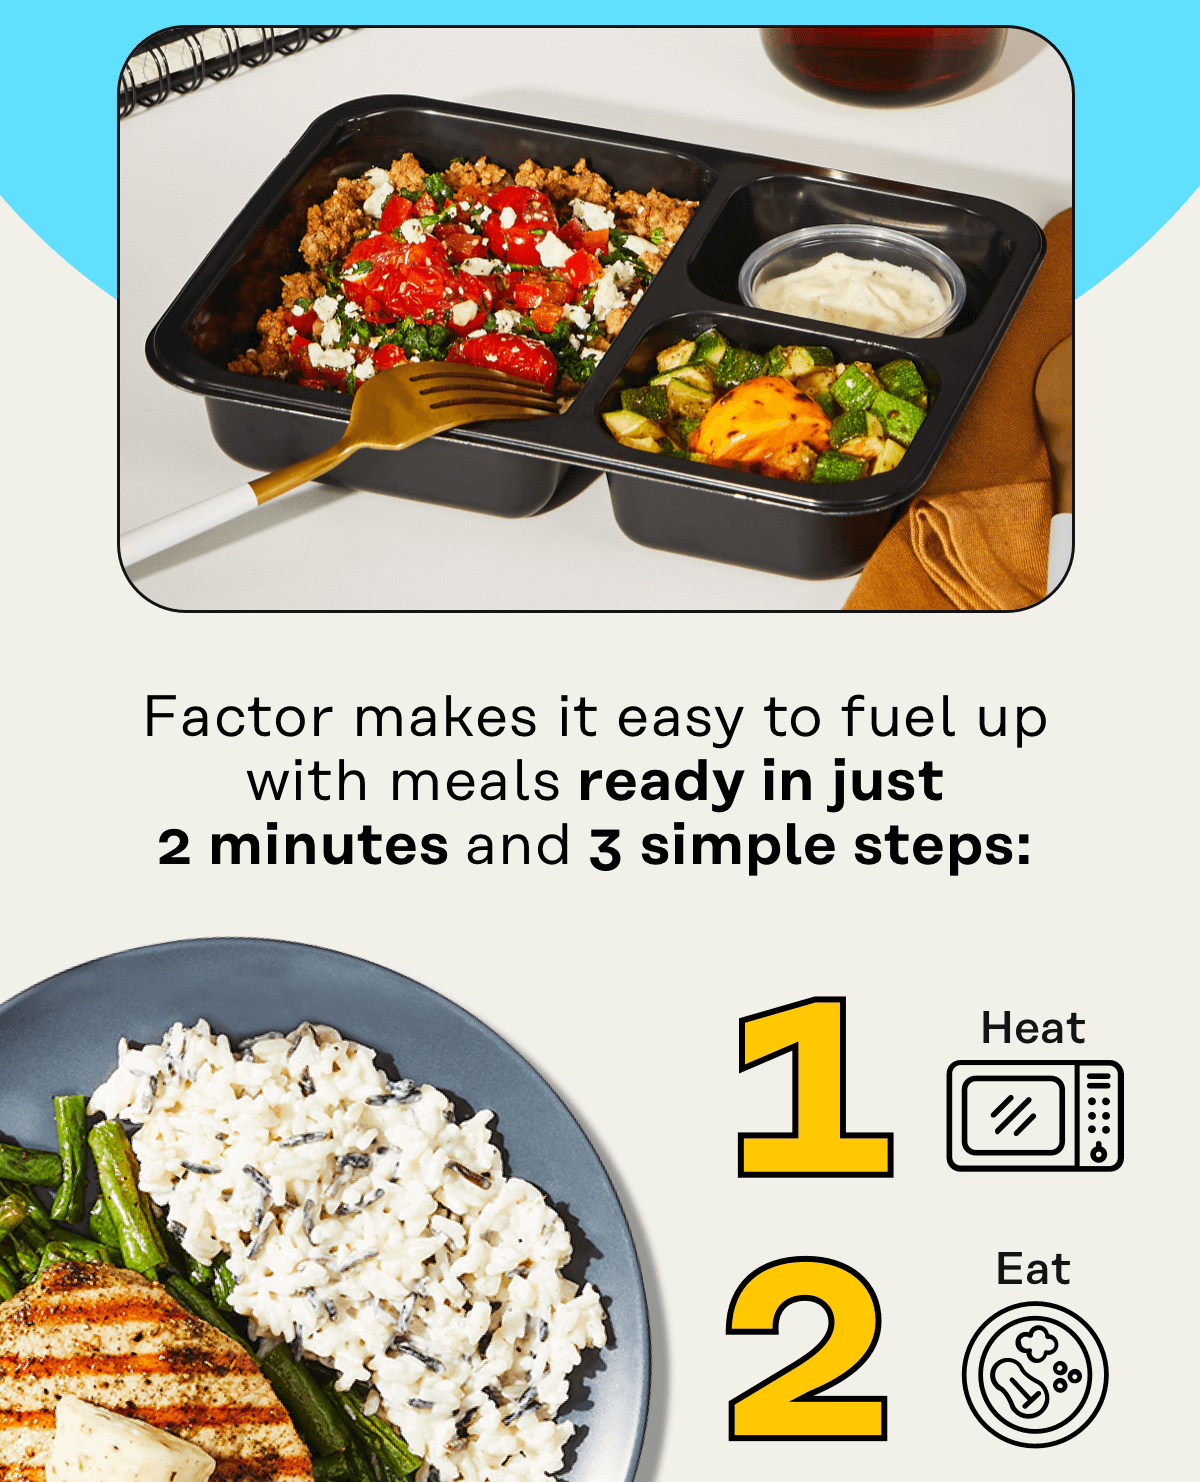 Factor makes it easy to fuel up with meals ready in just 2 minutes and 3 simple steps